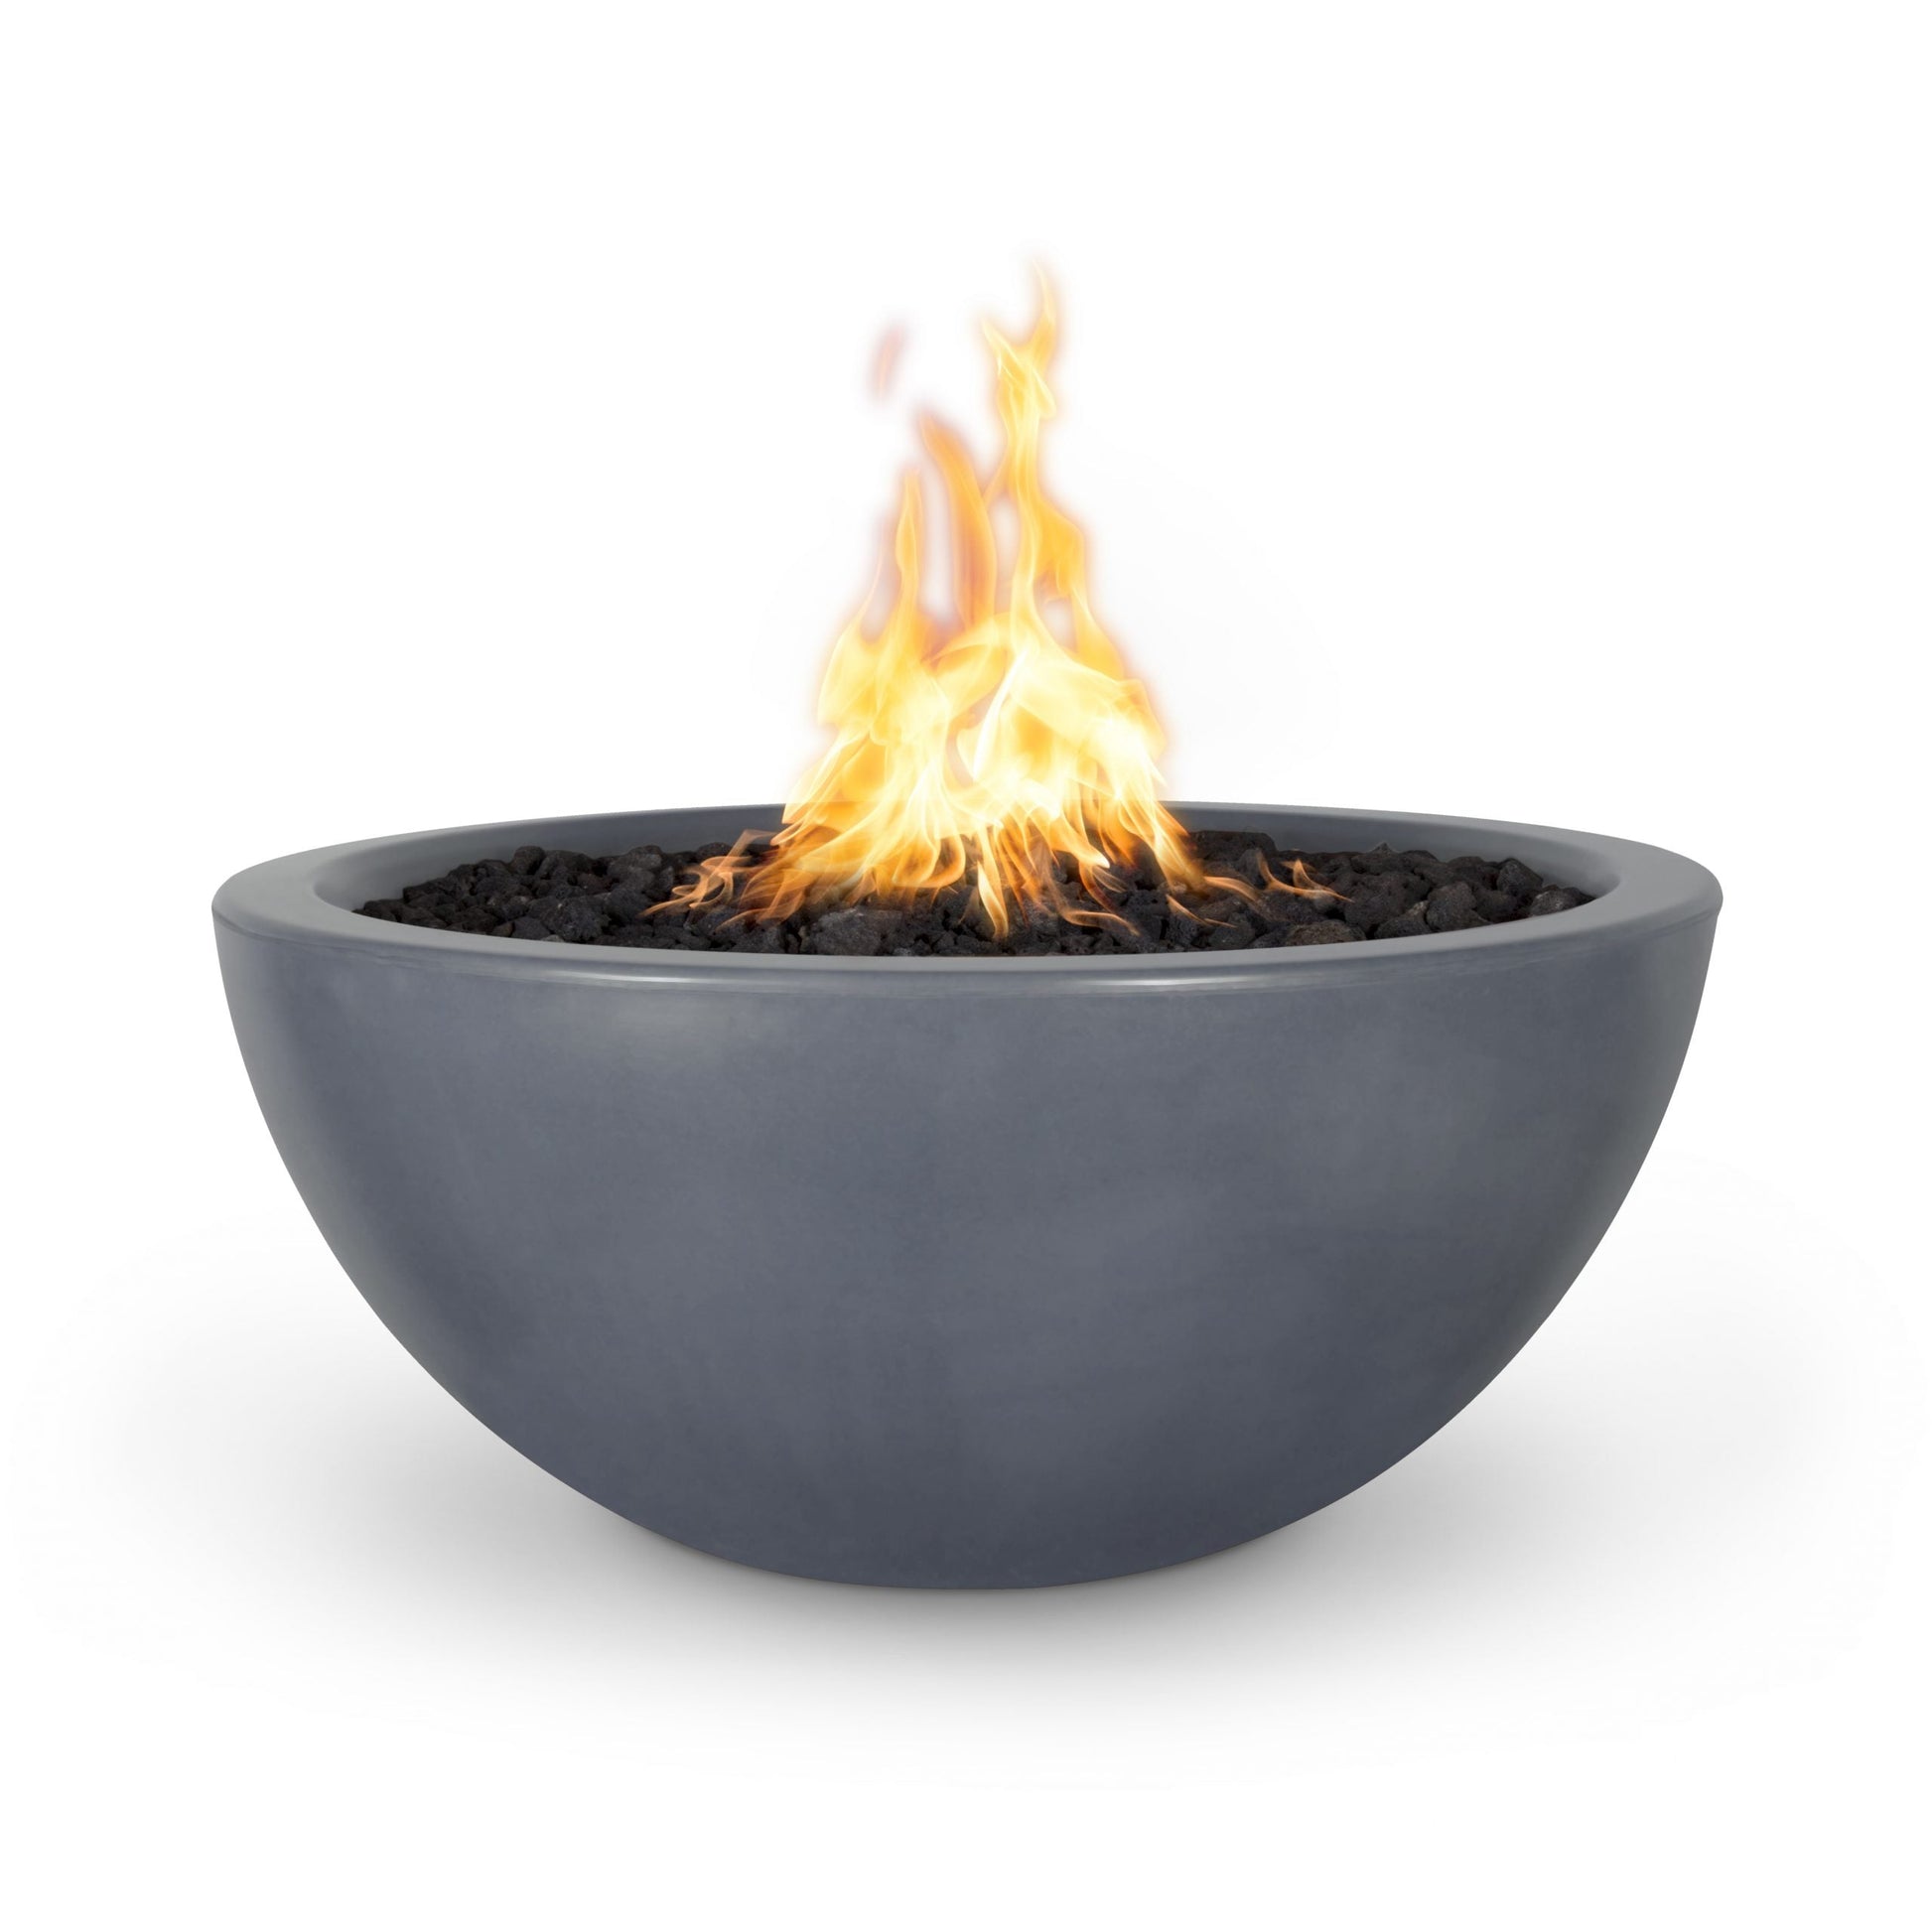 The Outdoor Plus Round Luna 38" Brown GFRC Concrete Liquid Propane Fire Bowl with Match Lit with Flame Sense Ignition